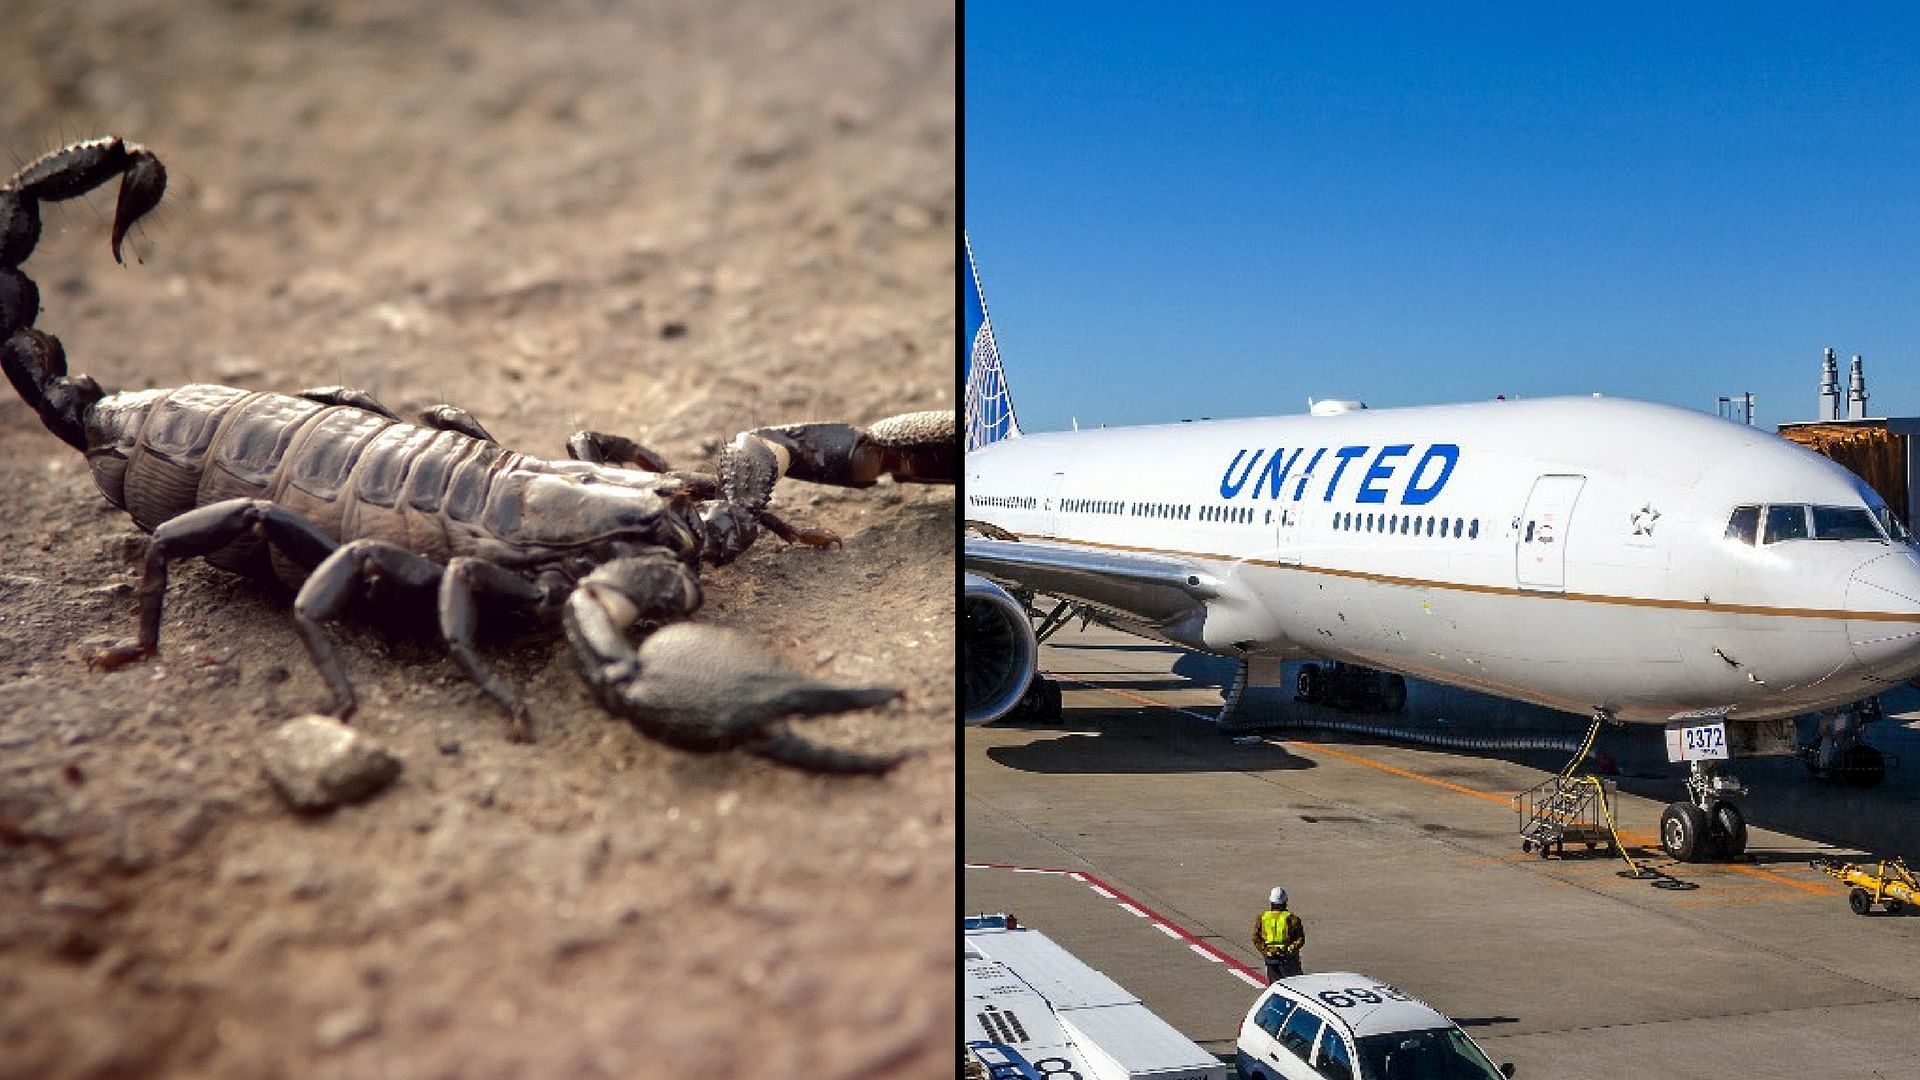 Canadian citizen Richard Bell was stung by a scorpion on a United Airlines flight. (Photo: <b>The Quint)</b>